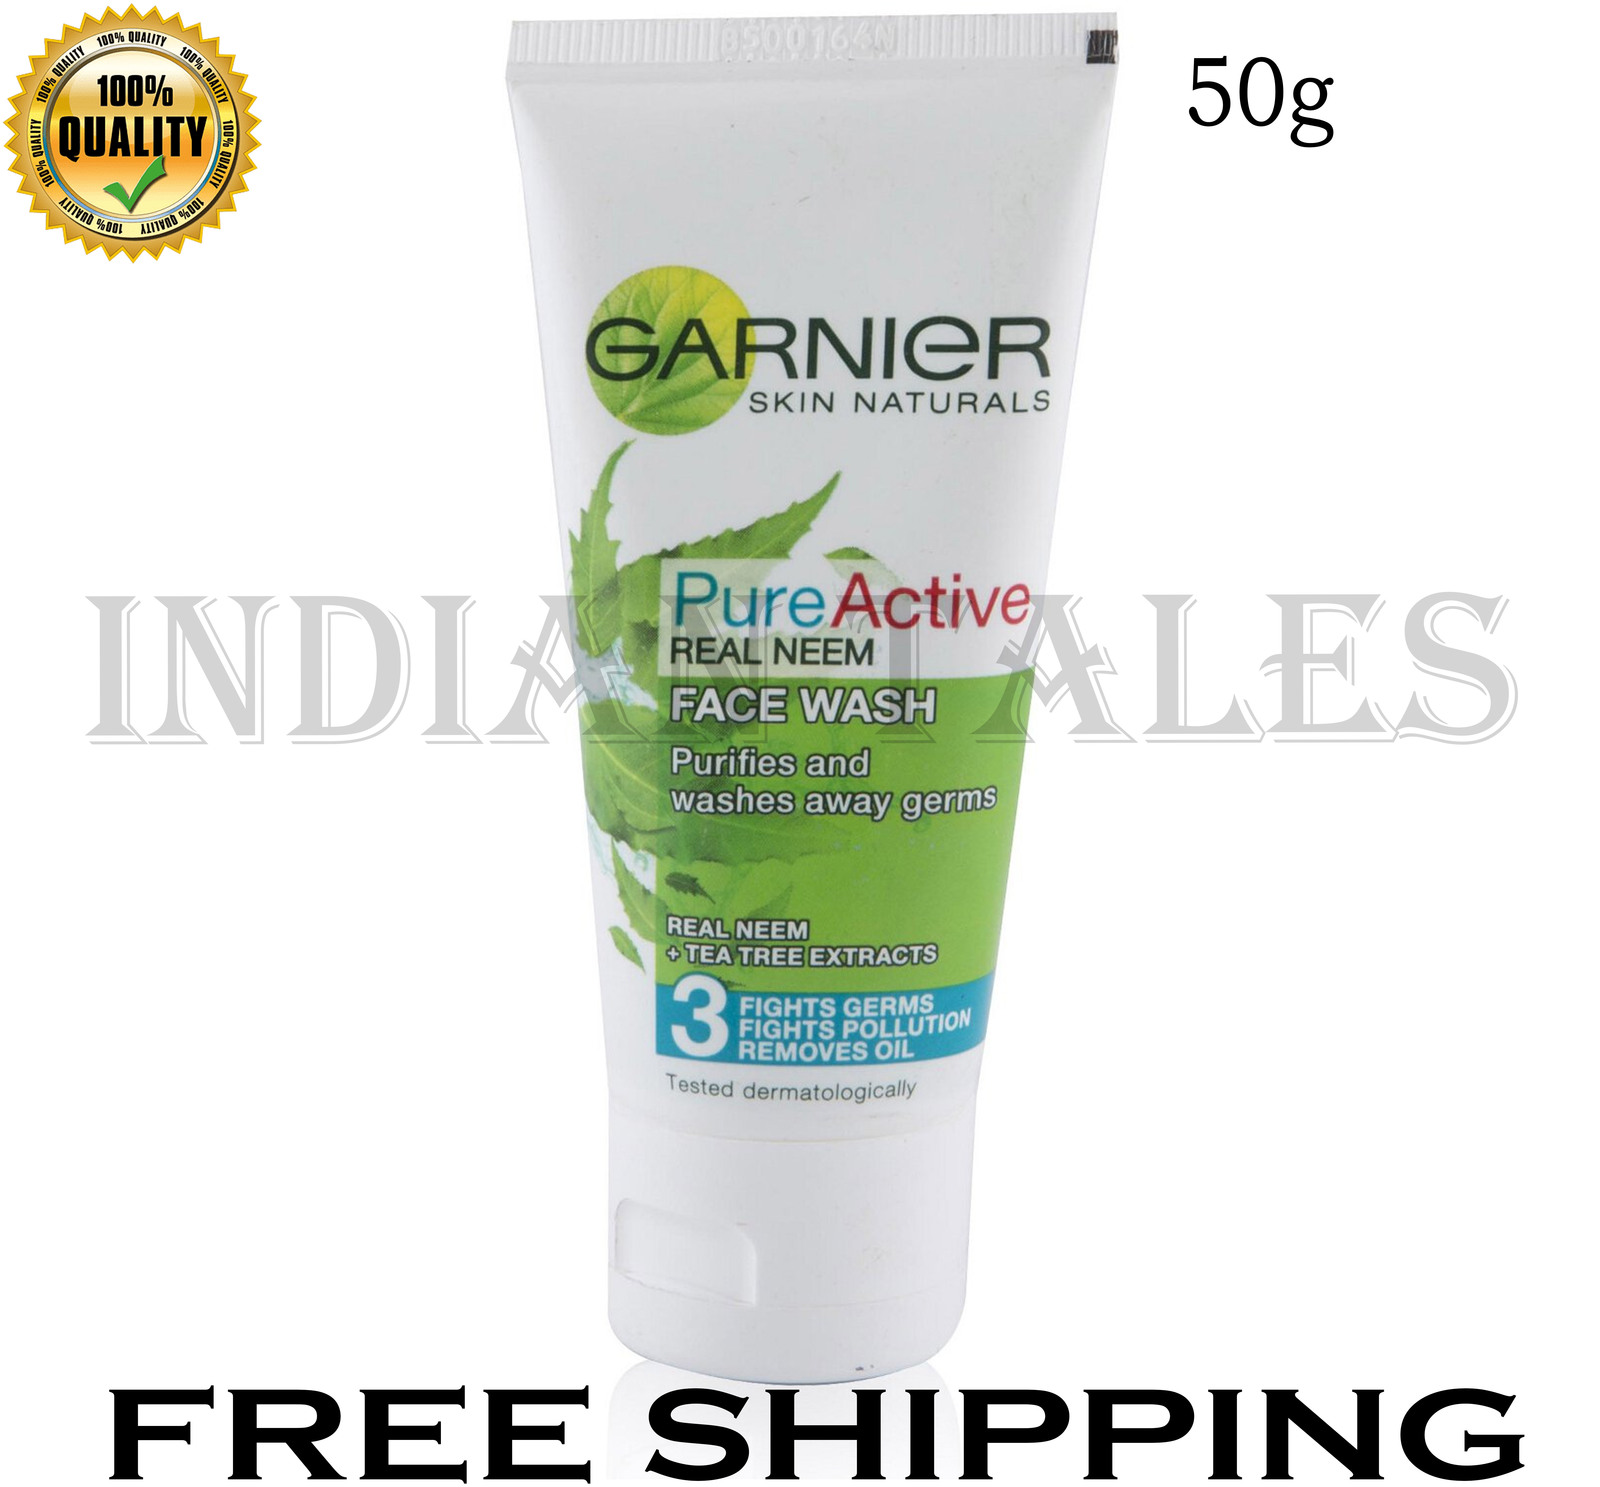 Primary image for  Garnier Skin Naturals PureActive Face Wash - Real Neem, 50g Tube 